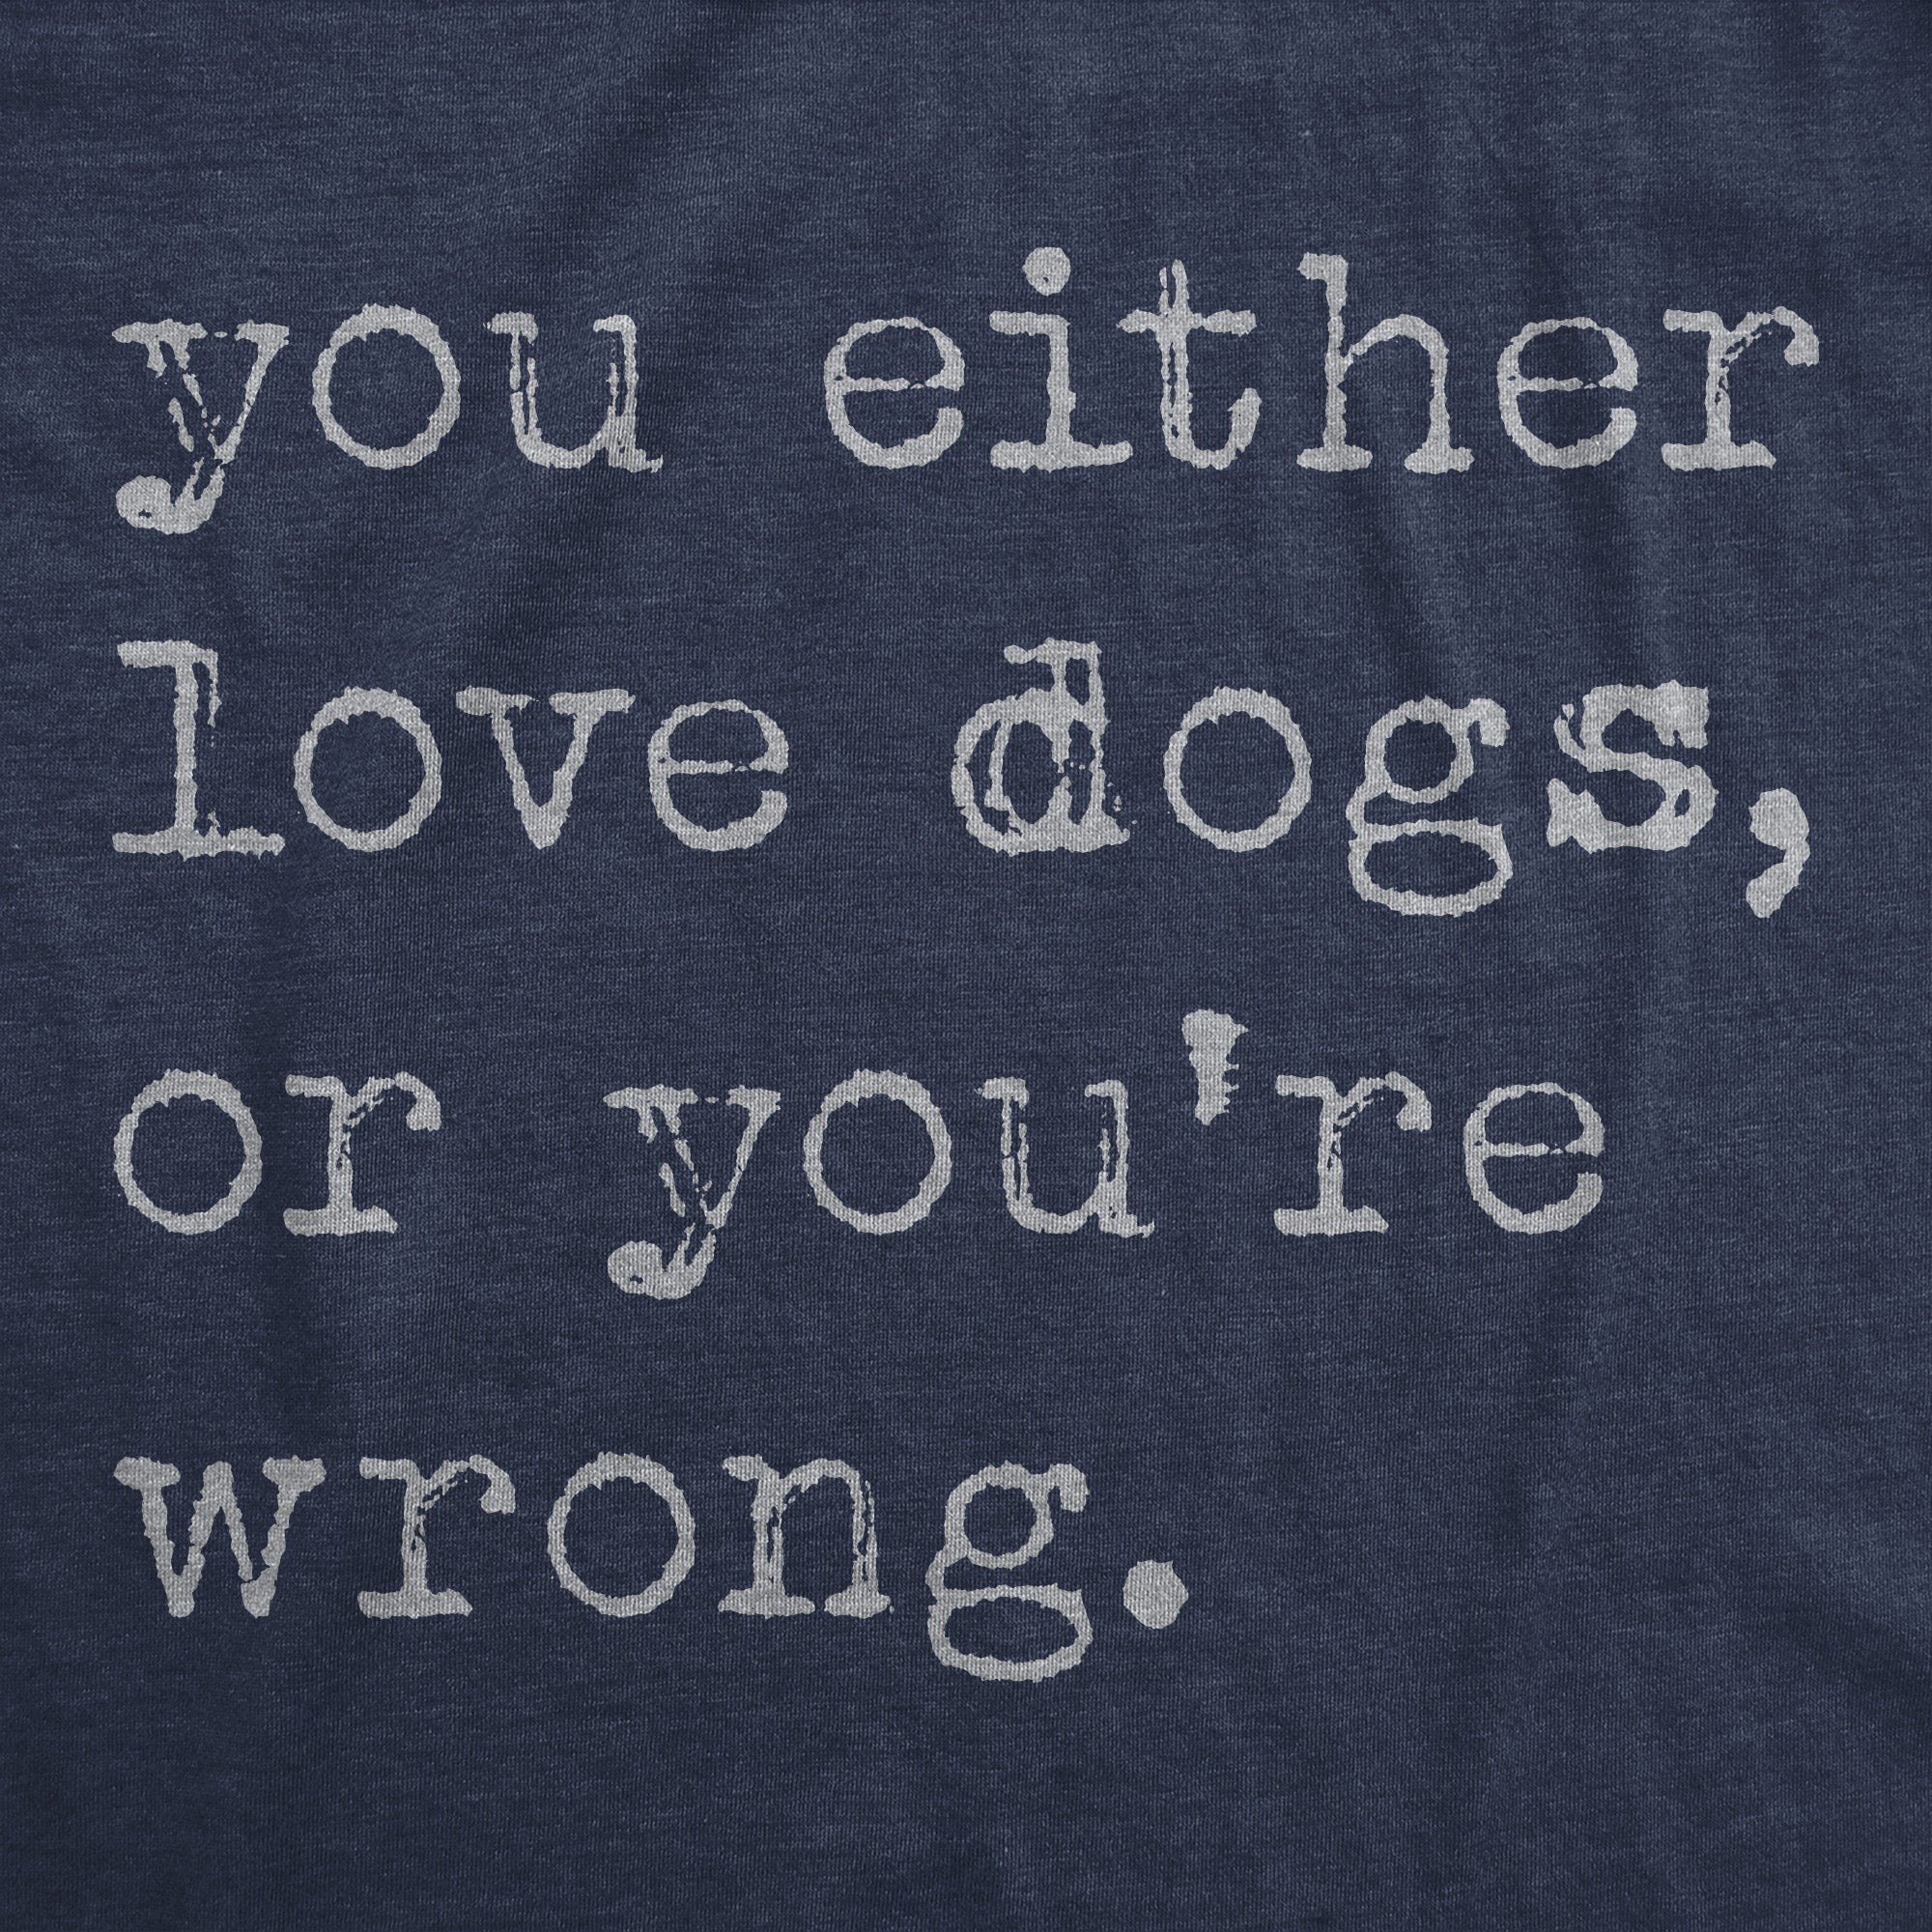 Funny Heather Navy - Either Love Dogs Or Youre Wrong You Either Love Dogs Or Youre Wrong Womens T Shirt Nerdy Dog sarcastic Tee